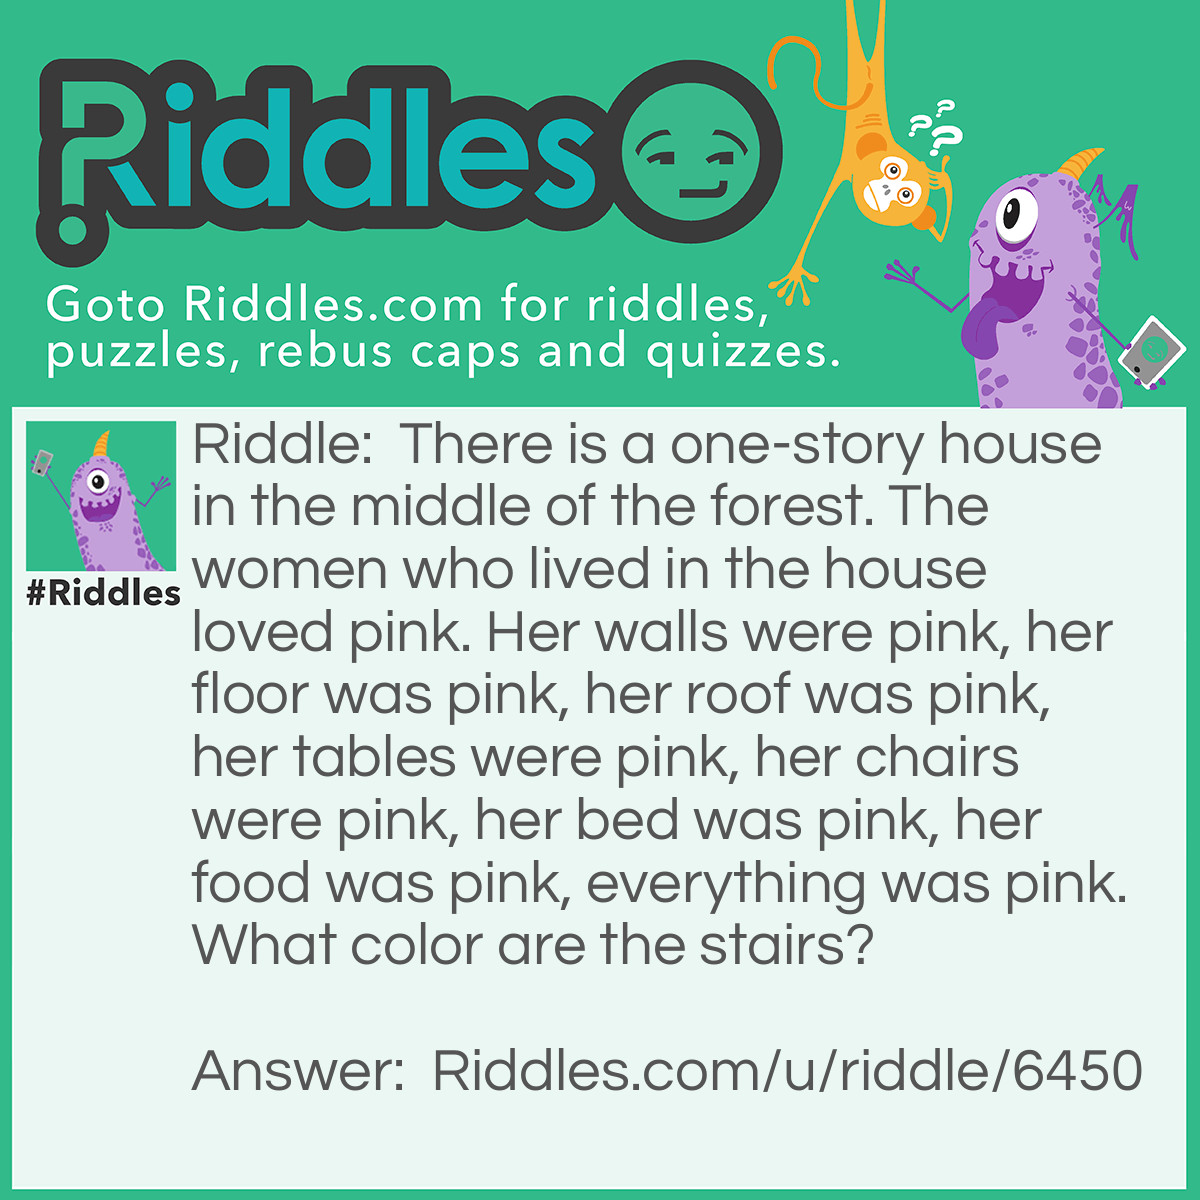 Riddle: There is a one-story house in the middle of the forest. The women who lived in the house loved pink. Her walls were pink, her floor was pink, her roof was pink, her tables were pink, her chairs were pink, her bed was pink, her food was pink, everything was pink. What color are the stairs? Answer: There are no stairs (Its invisible/clear), its a one story house!